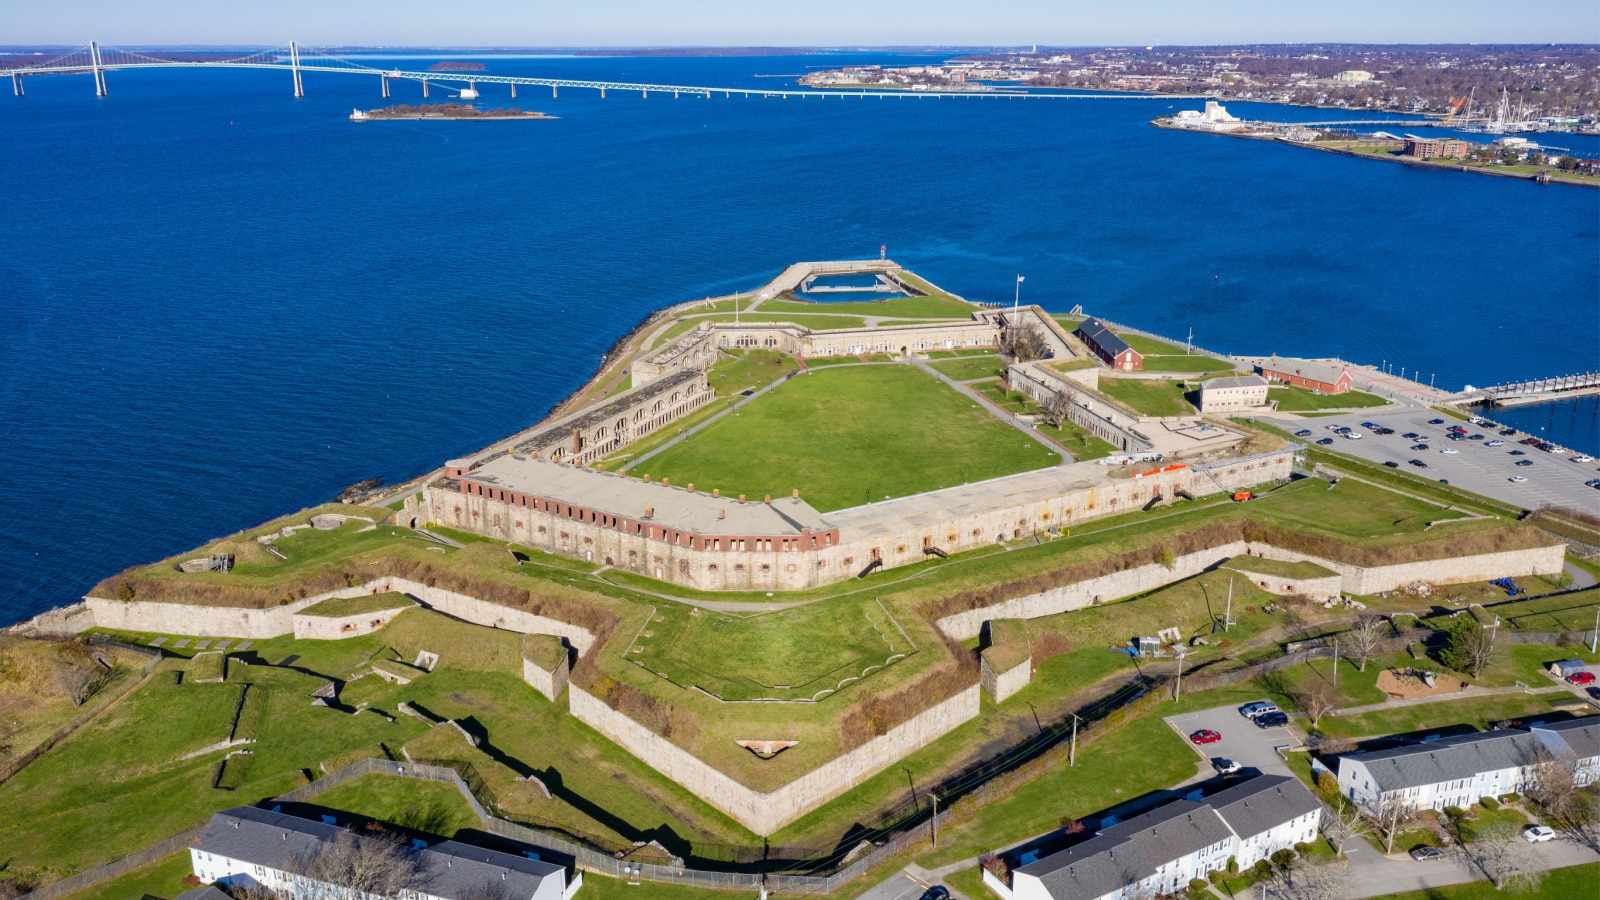 Fort Adams, a former United States Army post in Newport, Rhode Island that was established on July 4, 1799 as a First System coastal fortification, named for President John Adams.